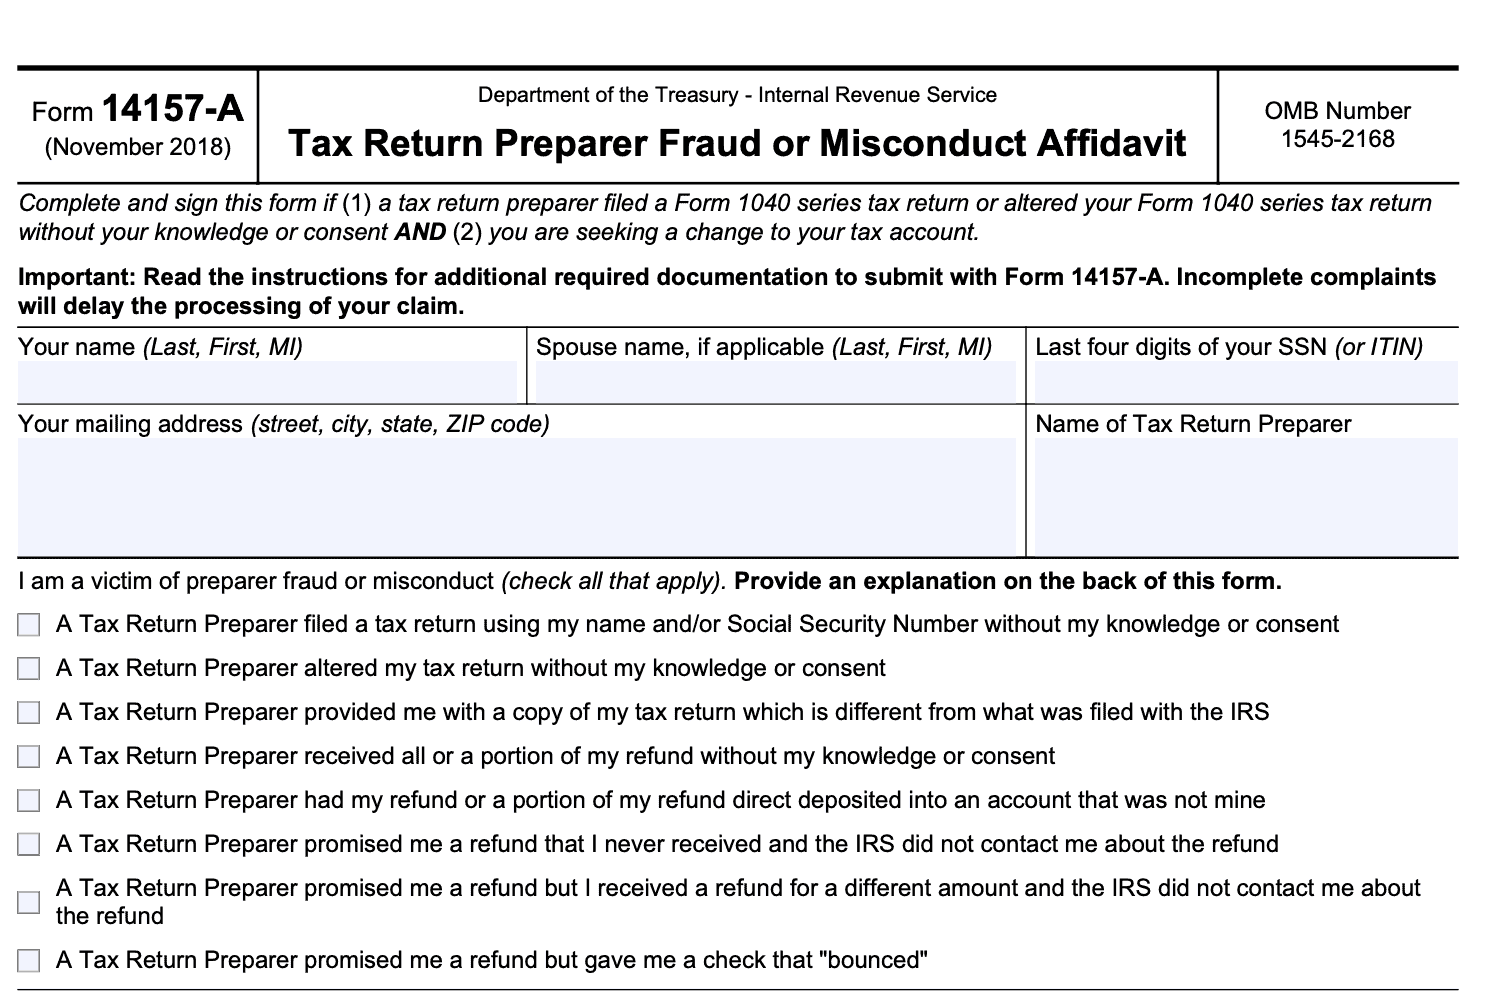 IRS Form 14157-A, tax return preparer fraud or misconduct affidavit, taxpayer information and type of fraud